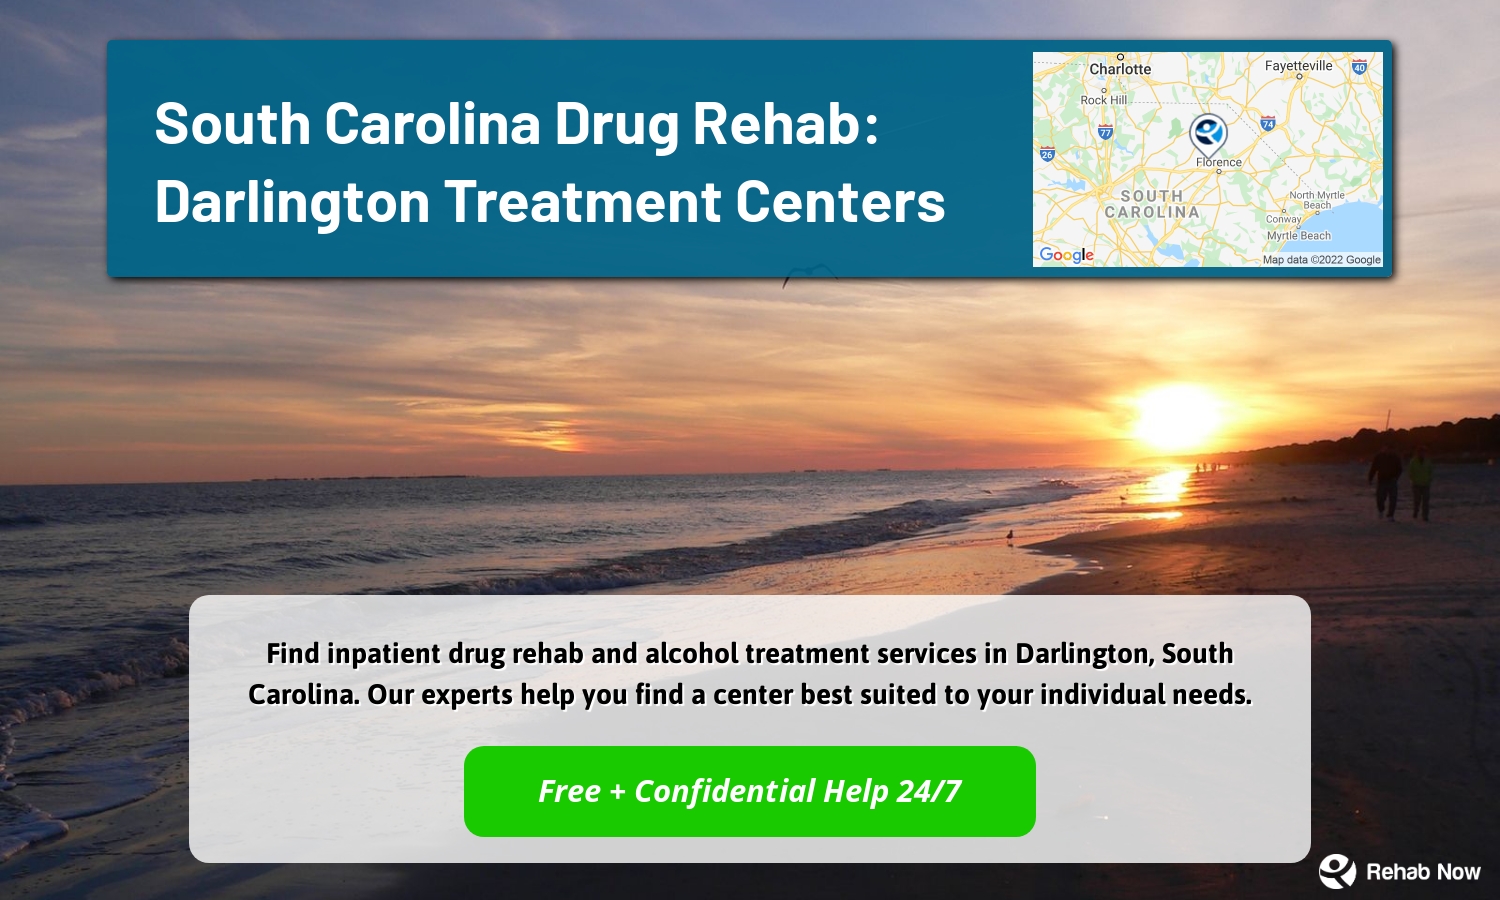 Find inpatient drug rehab and alcohol treatment services in Darlington, South Carolina. Our experts help you find a center best suited to your individual needs.